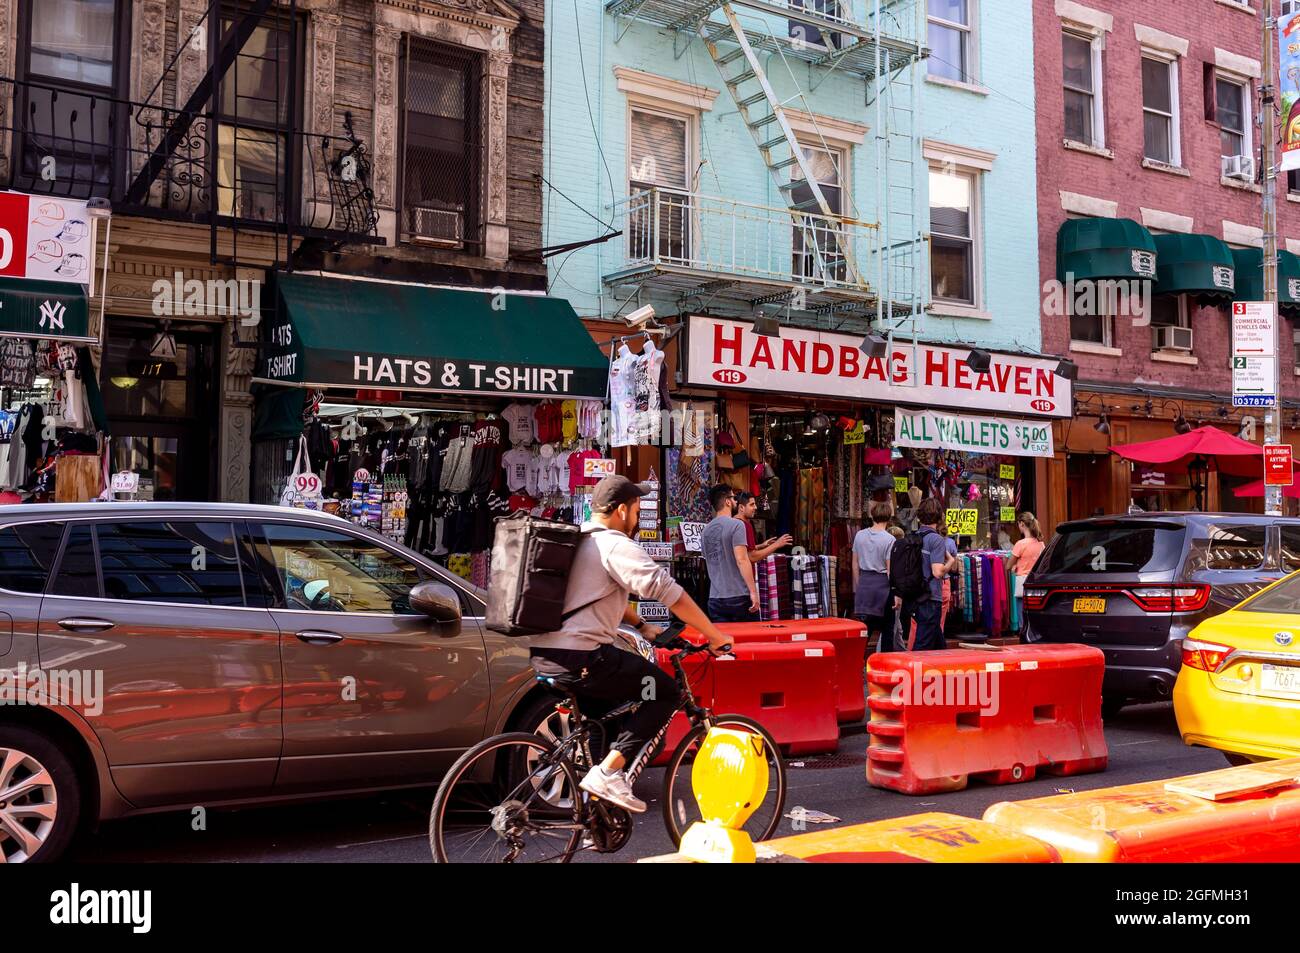 crowds in shops and street in Little Italy, New York City Stock Photo